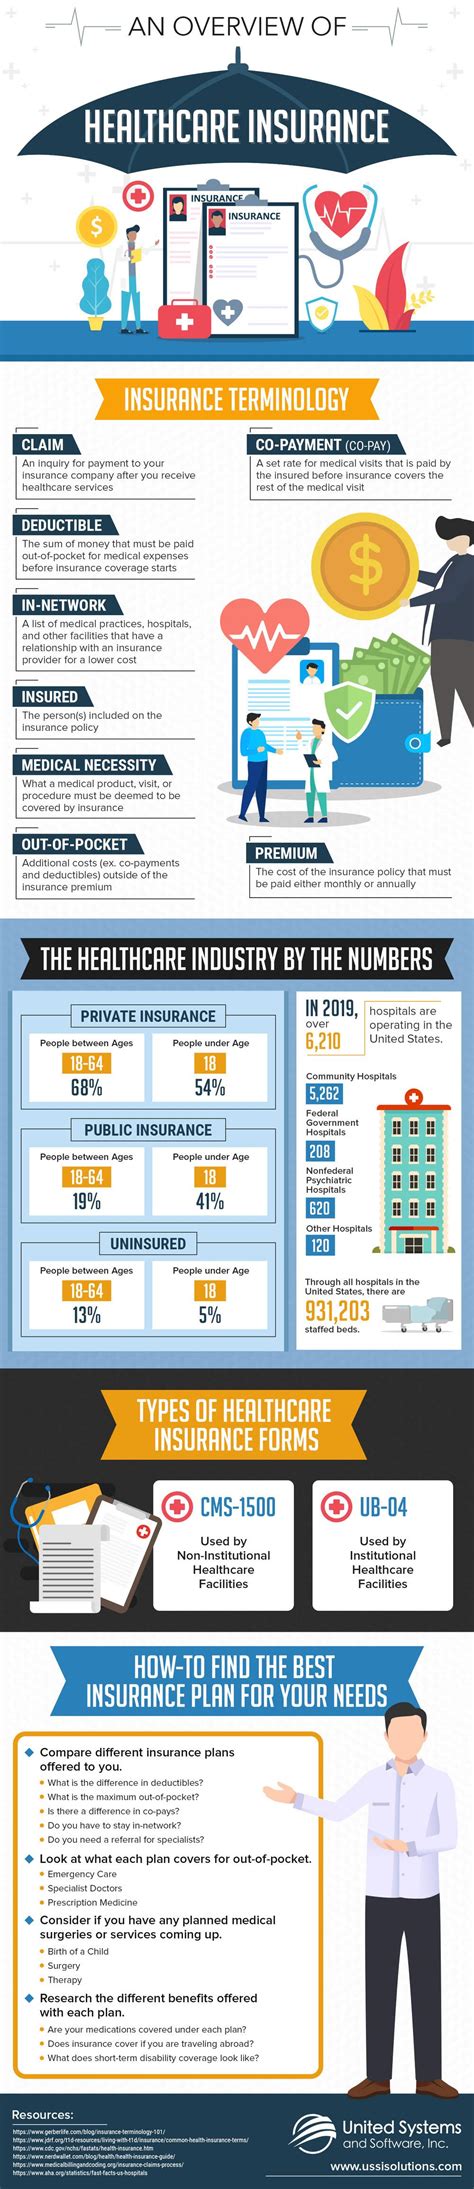 An Overview Of Healthcare Insurance Infographic Visualistan